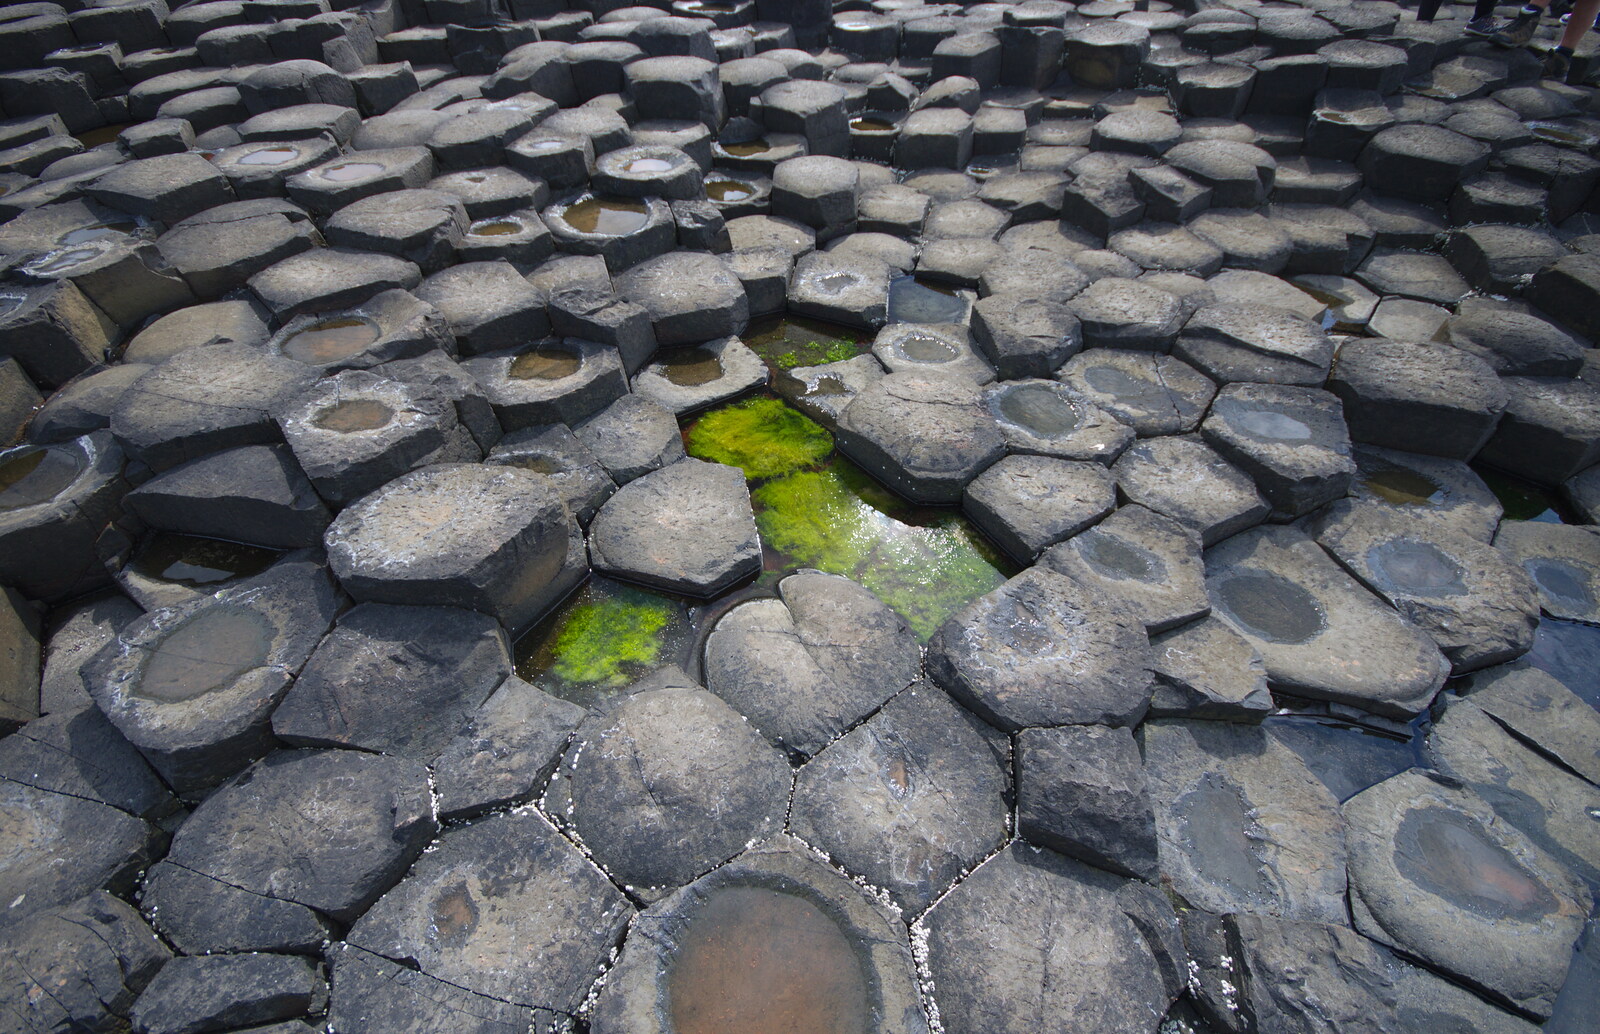 A couple of green algae hexagons from The Giant's Causeway, Bushmills, County Antrim, Northern Ireland - 14th August 2019